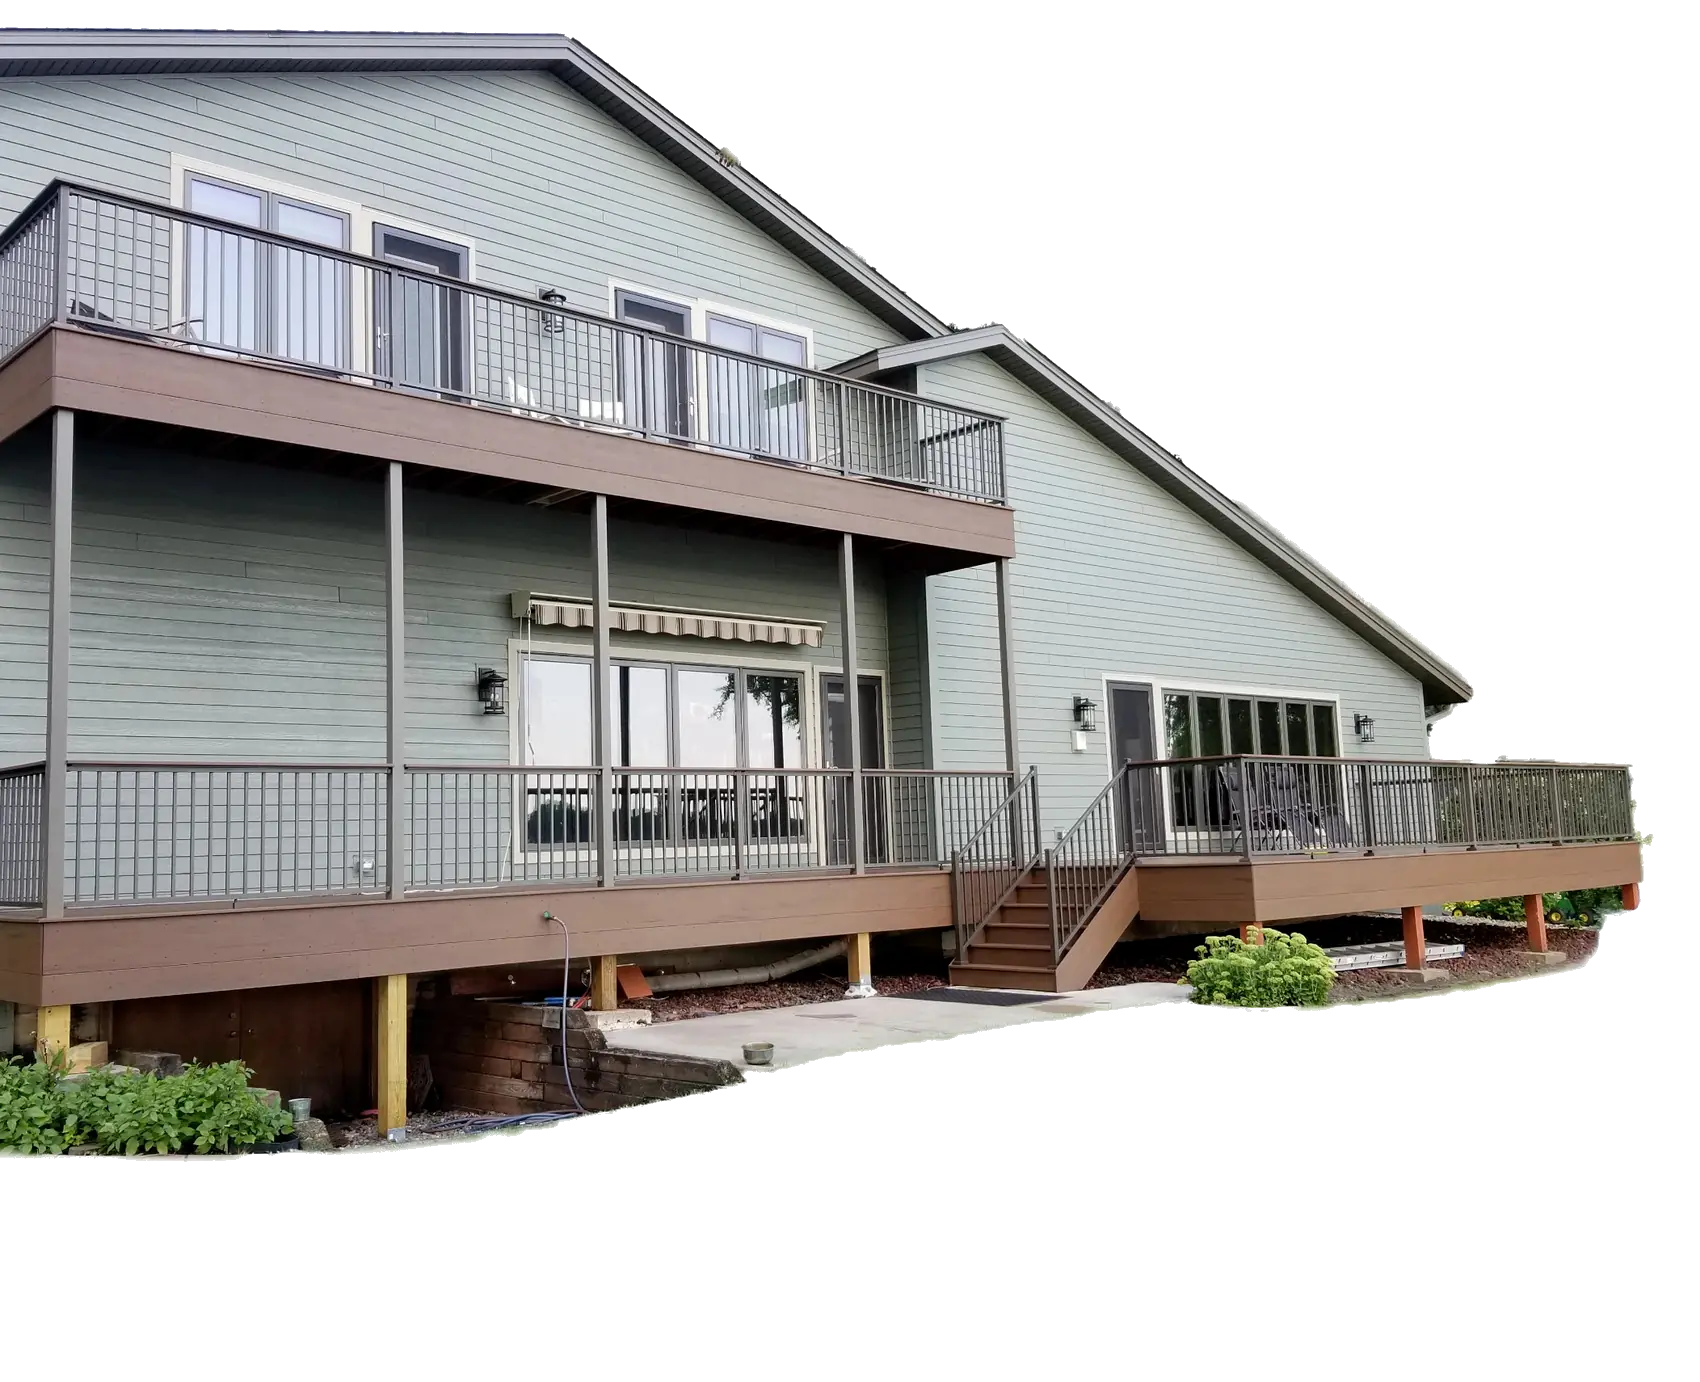 A 2 story home withe green siding and a balcony.